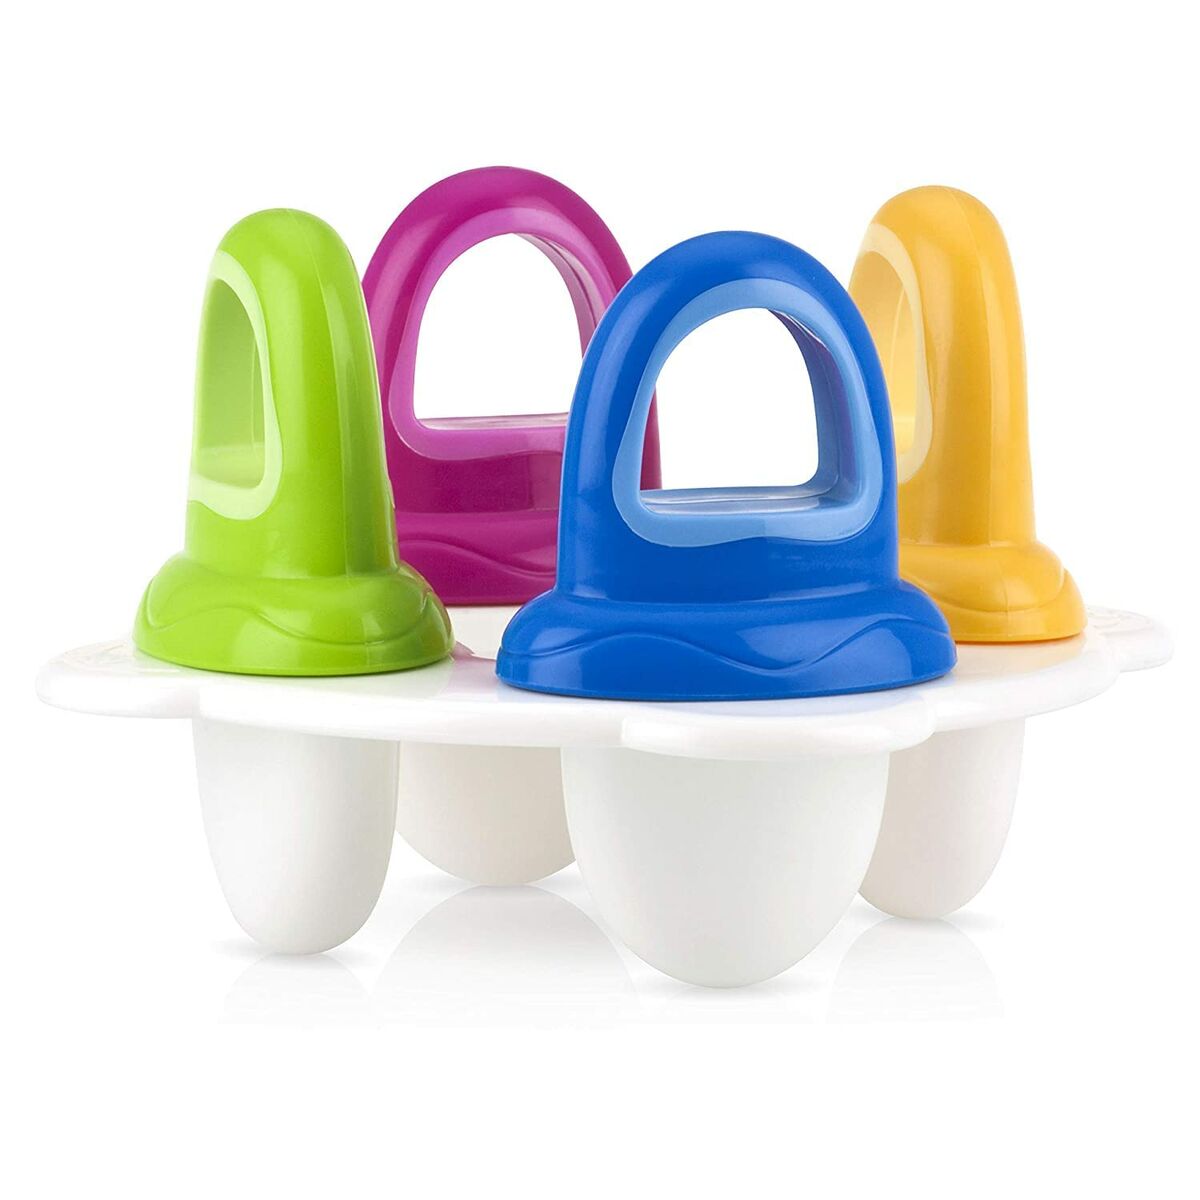 Ice Cream Moulds Nûby (Refurbished A)